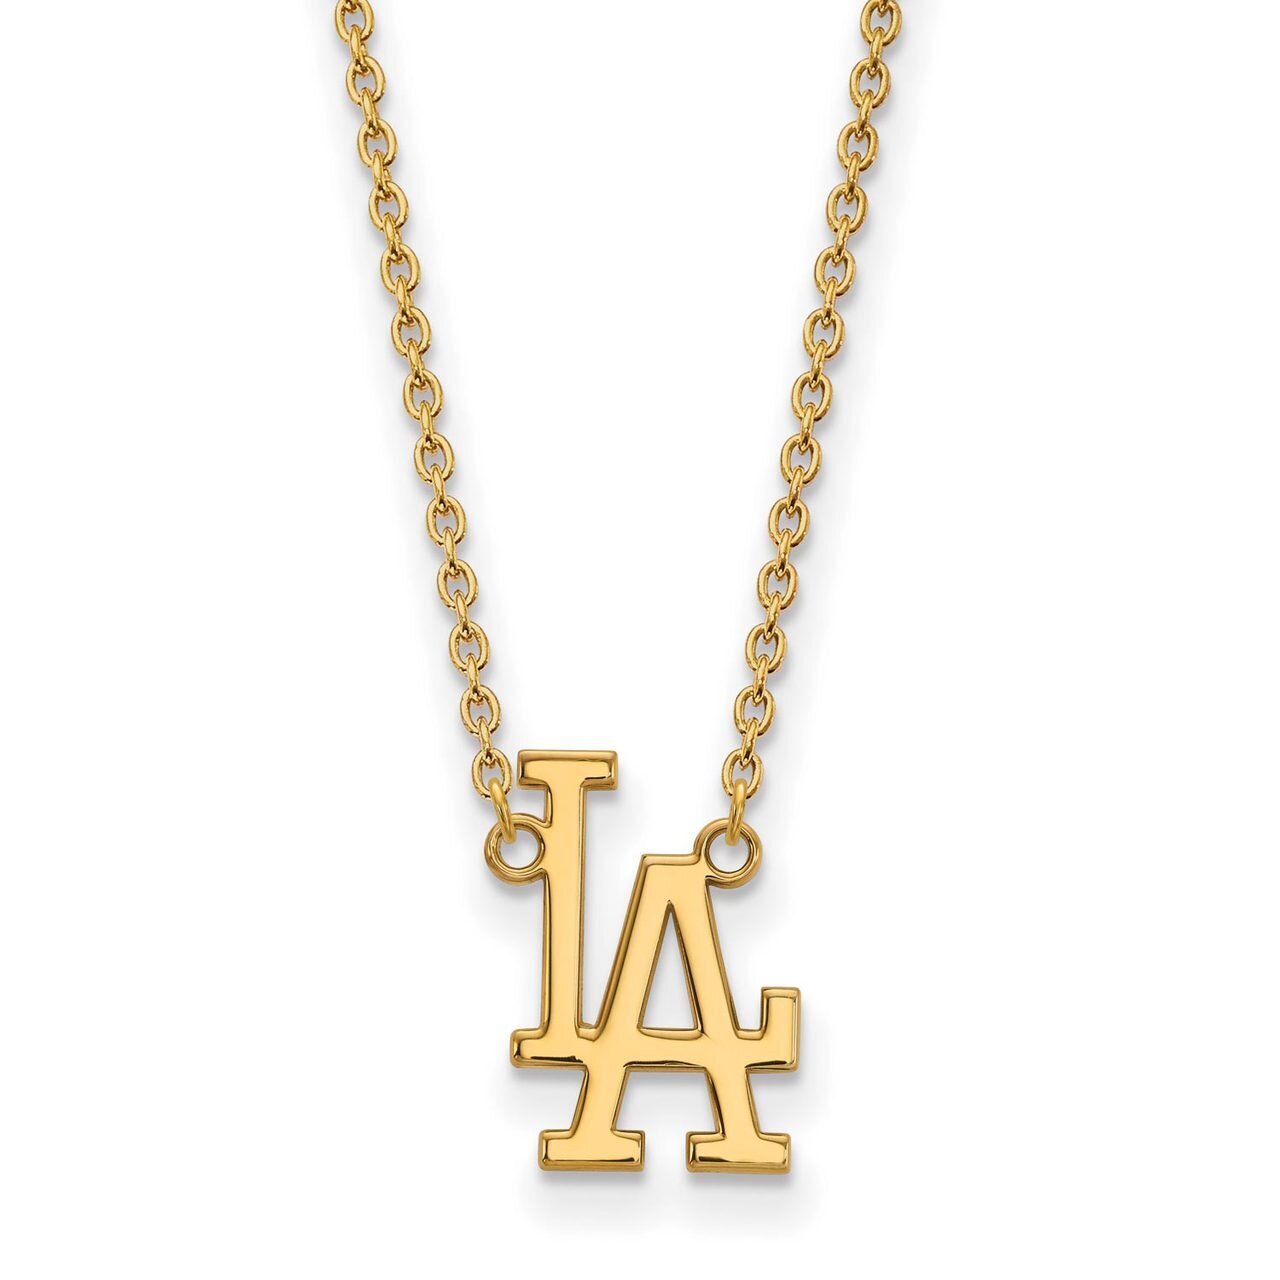 Los Angeles Dodgers Large Pendant with Chain Necklace 14k Yellow Gold 4Y009DOD-18